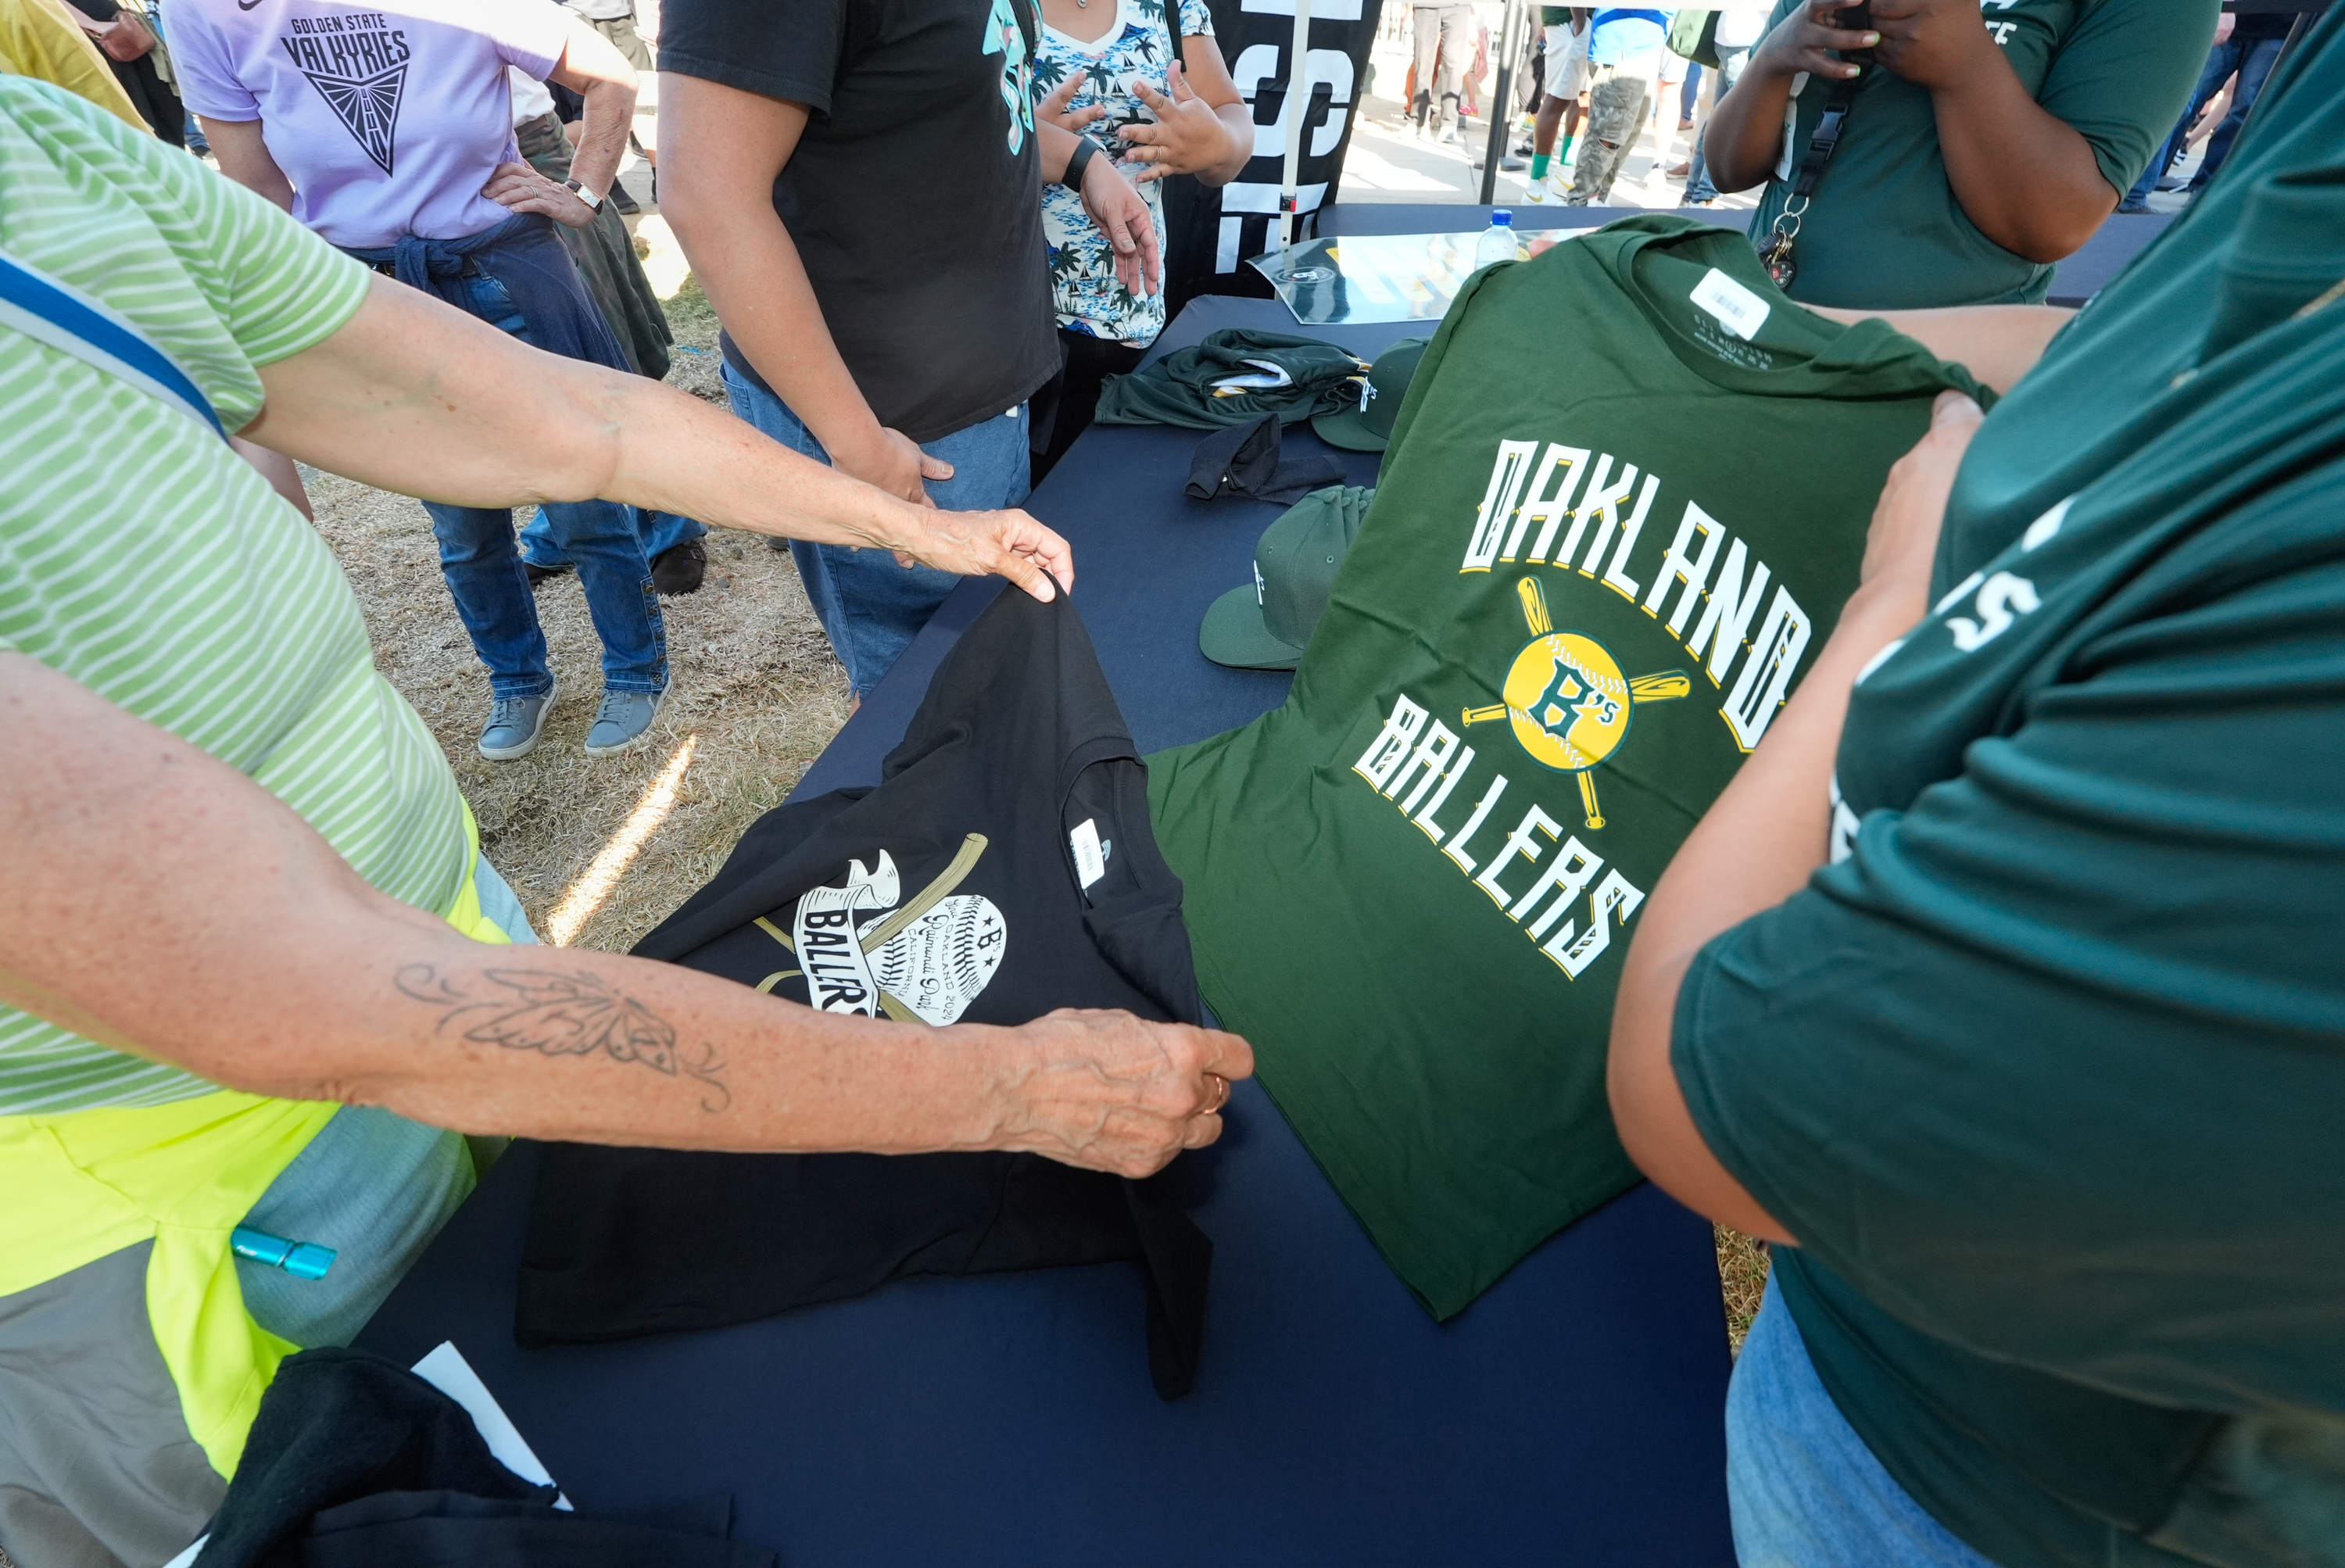 People are gathered around a table, examining green and black shirts with &quot;Oakland Ballers&quot; logos. One person has a tattoo on their arm. Other individuals are wearing printed shirts.